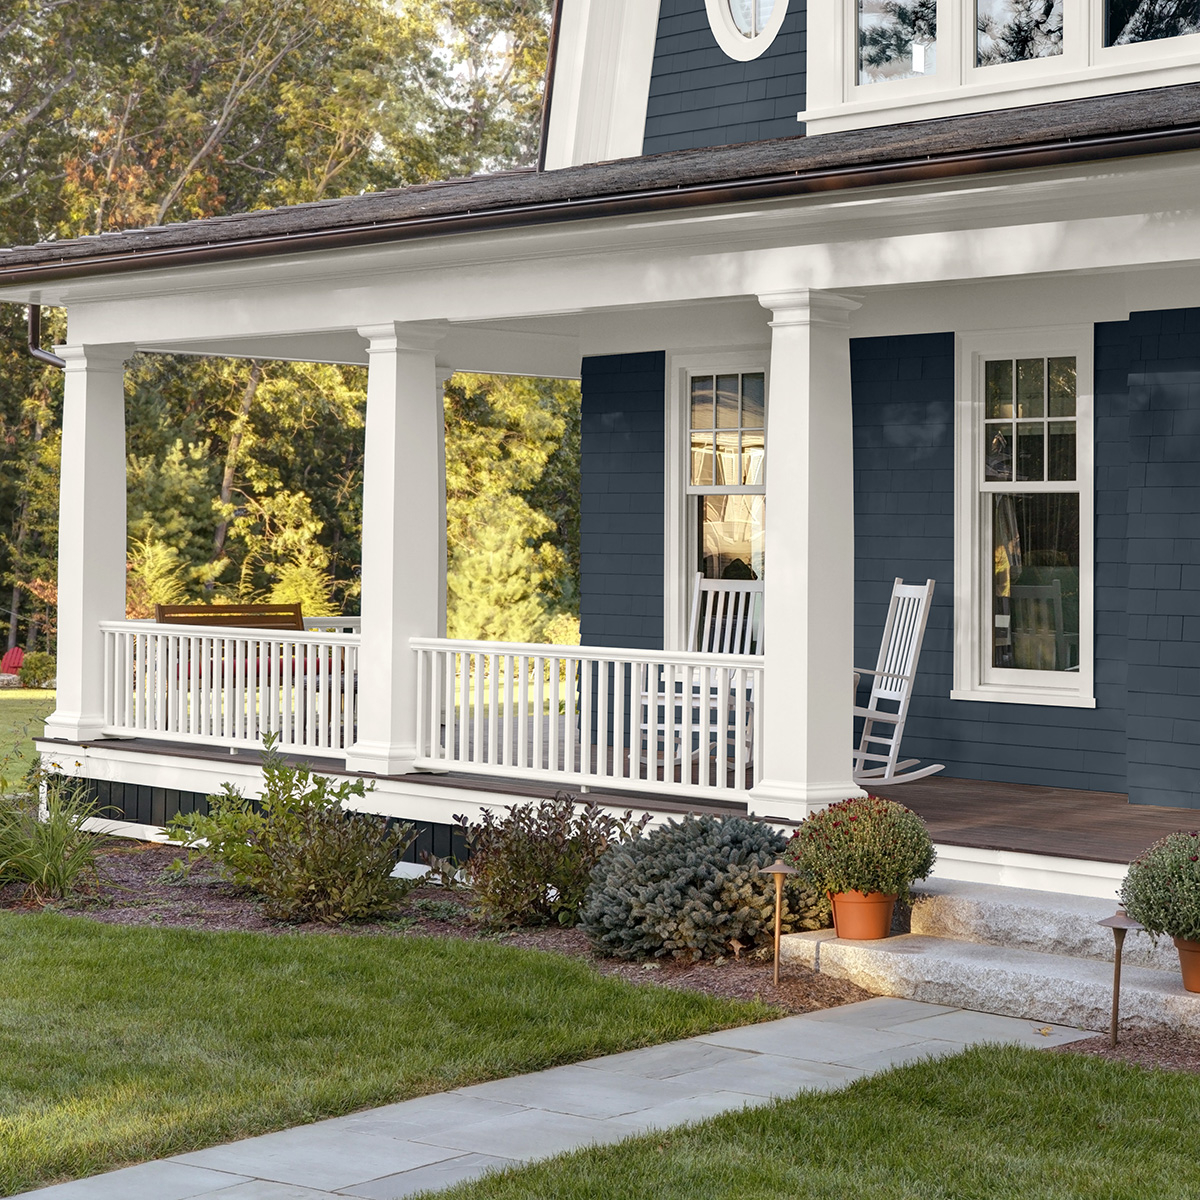 A blue and white house exterior painted with Behr Dynasty Exterior paint